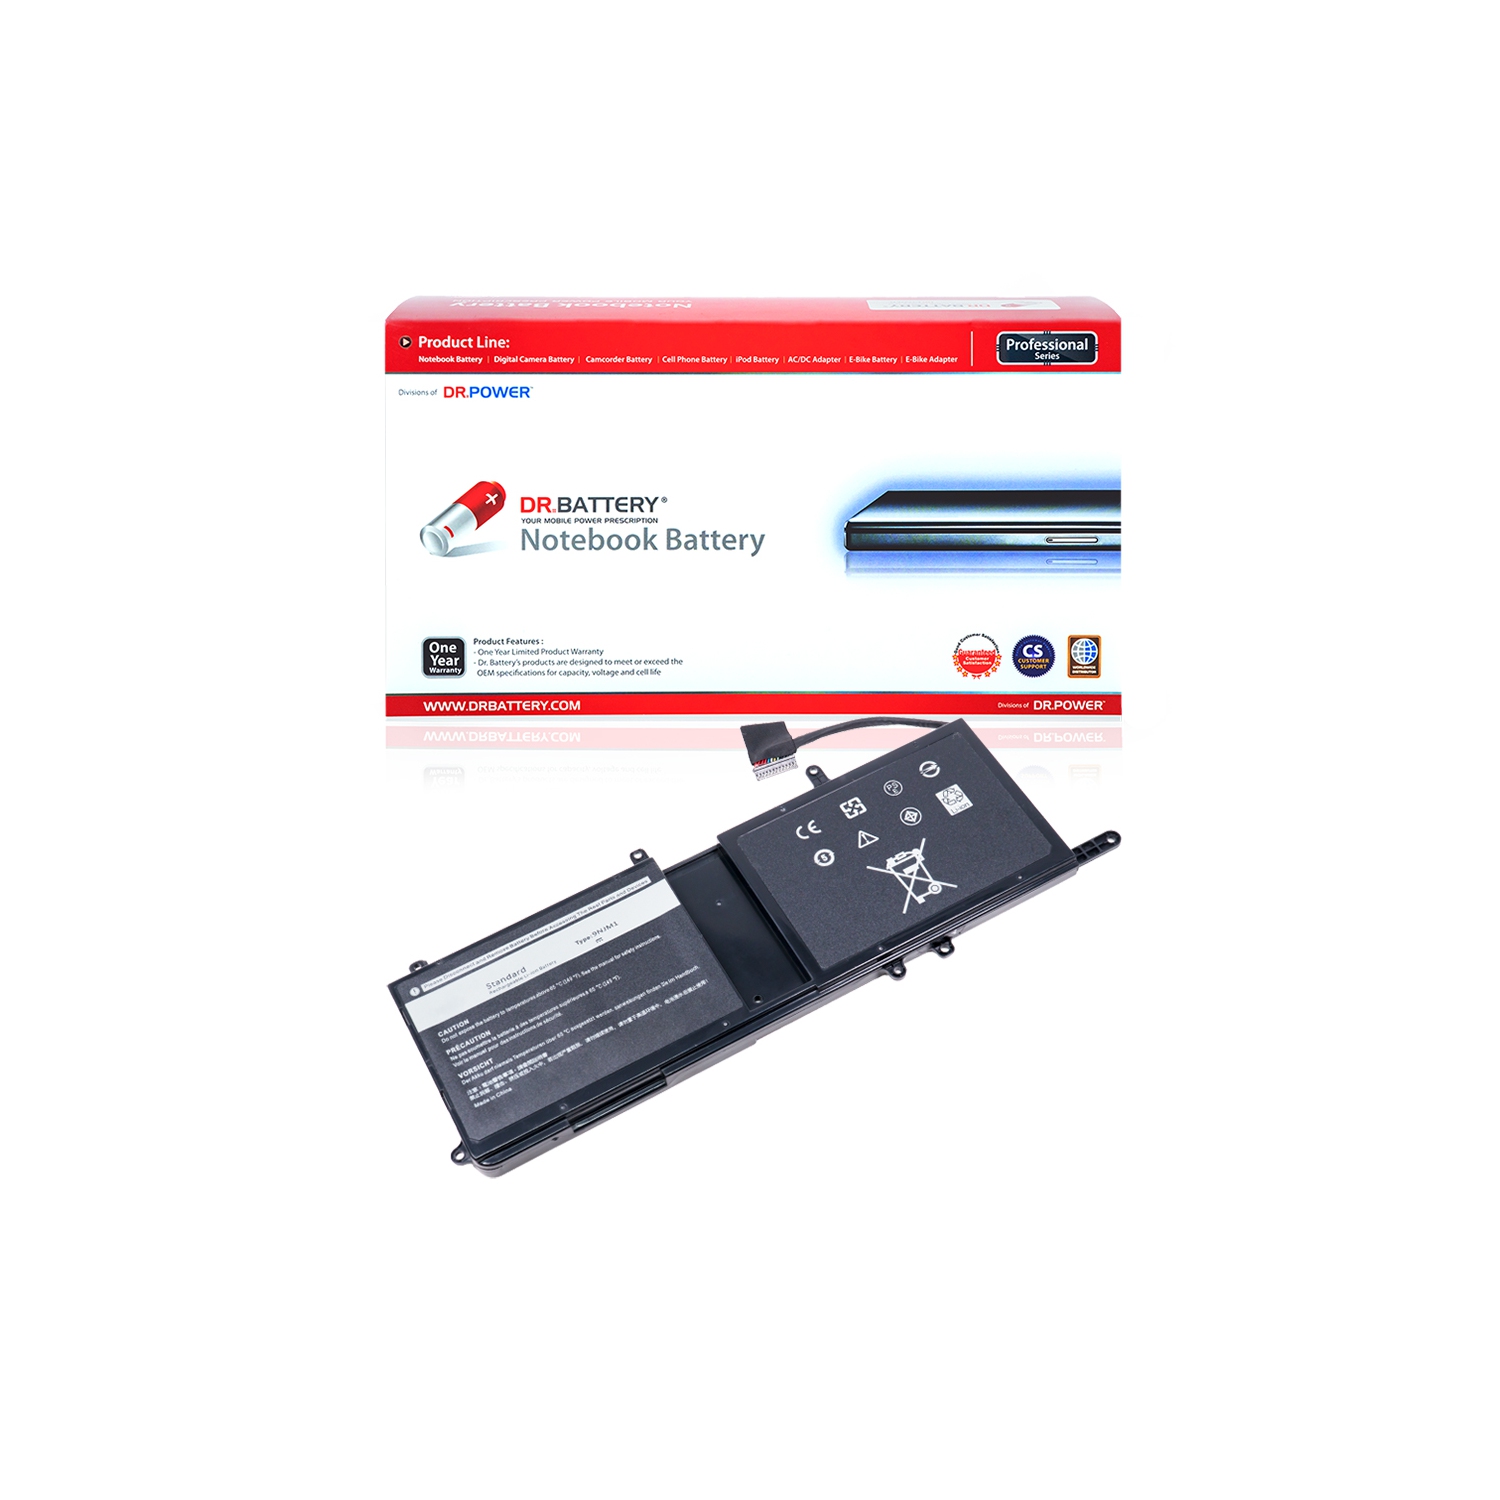 DR. BATTERY - Replacement for Dell Alienware 15 17 ALW17C-D3768B / 17 ALW17C-D3848B / 17 ALW17C-D3848S / 01D82 / 0546FF